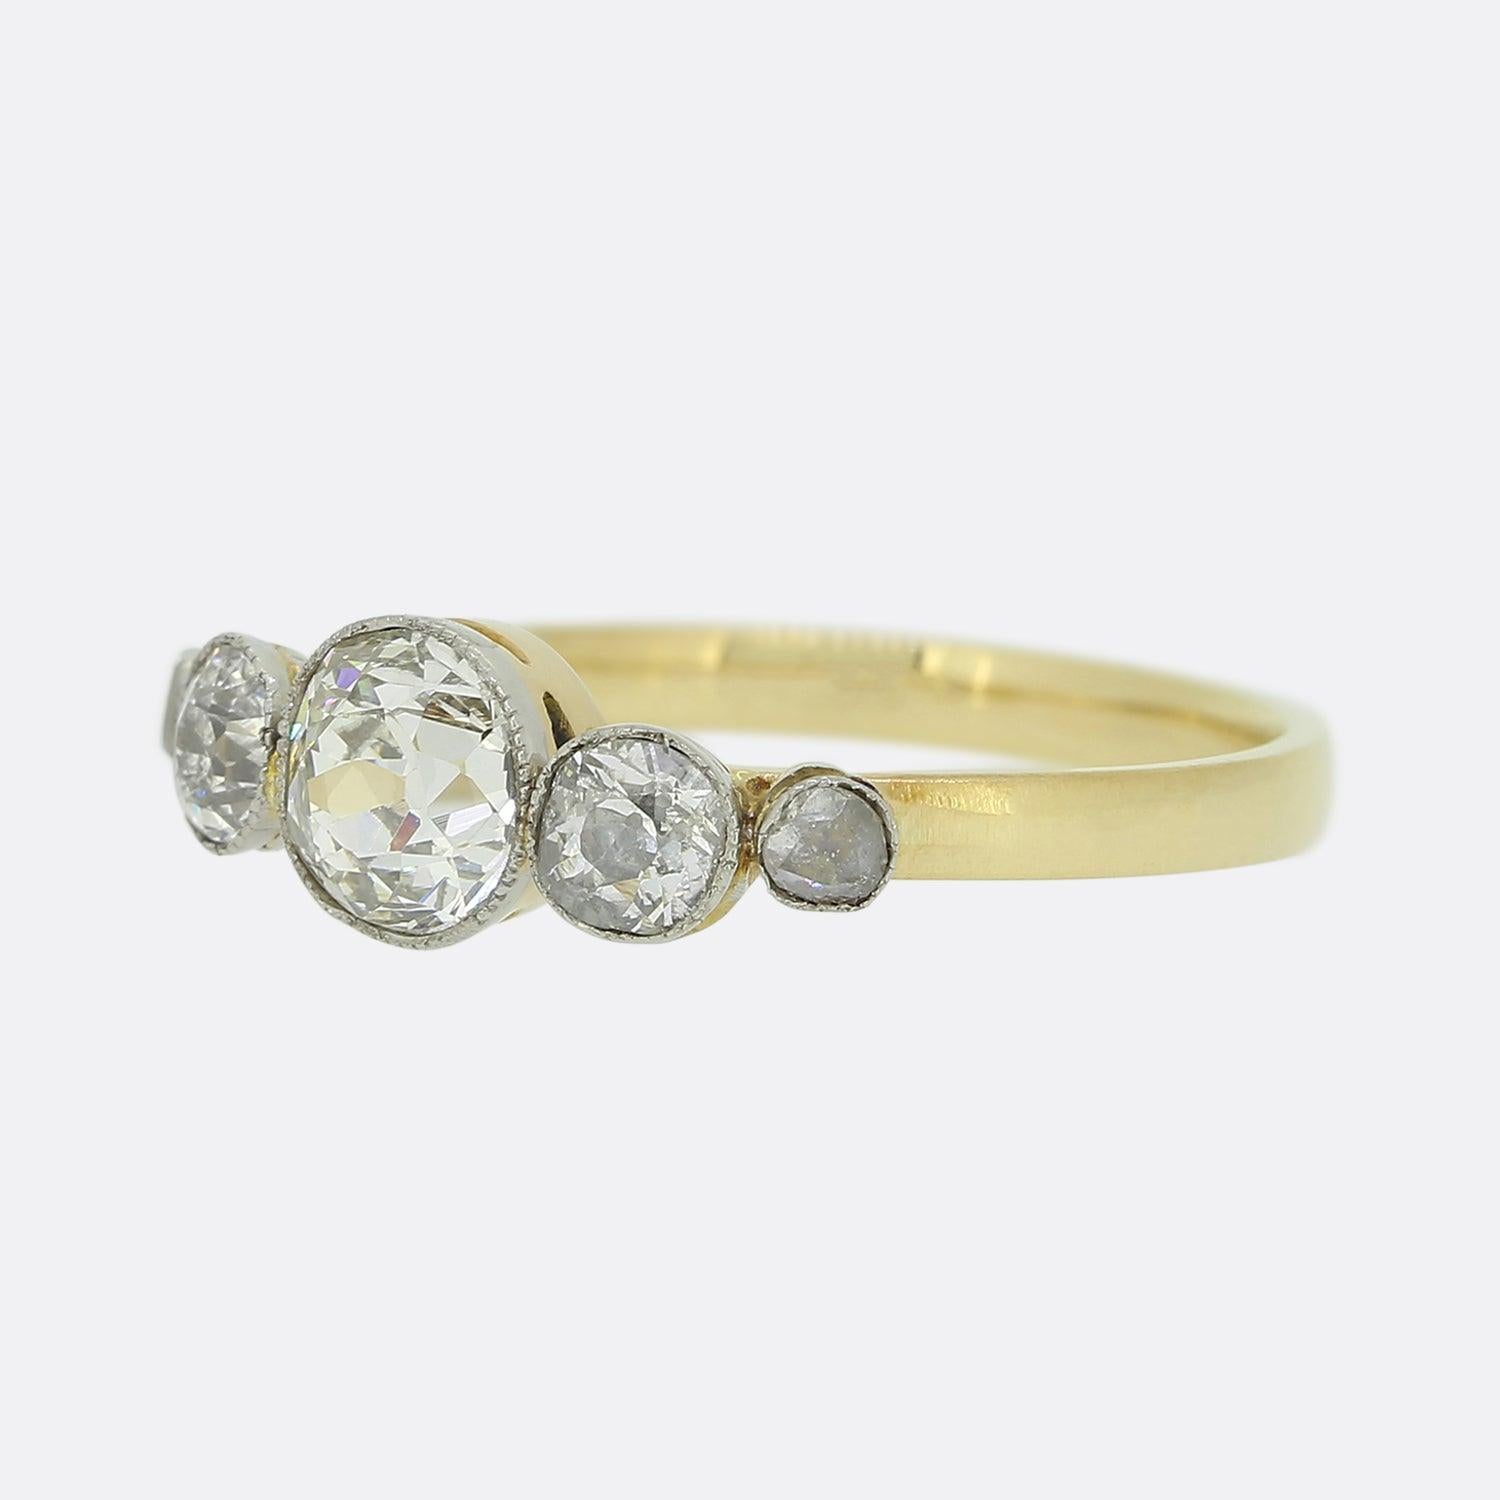 Here we have a wonderfully arranged vintage five stone diamond ring. A sizeable old cut diamond sits at the centre which is flanked on either side by a slightly smaller matching old cut diamond. A rose cut diamond at either end of the line formation